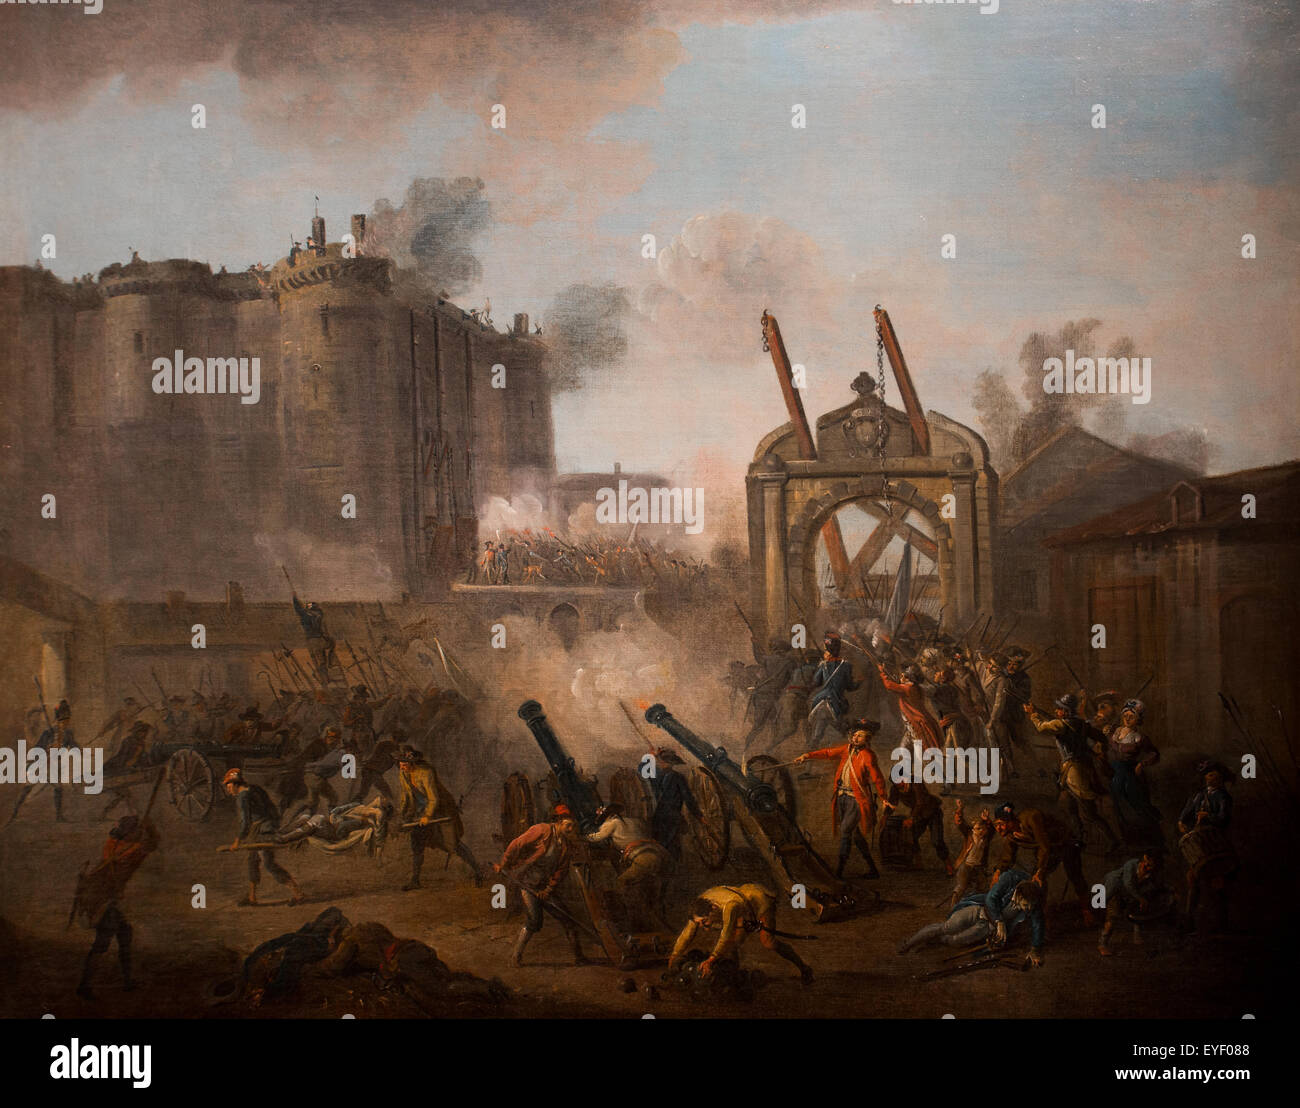 Storming of the Bastille, july 14th 1789 German. Defensive structure of the wall of Charles V, built in the sixteenth century, the Bastille became under Richelieu a prison , and therefore an arbitrary symbol of monarchical power, since enough of a simple Stock Photo